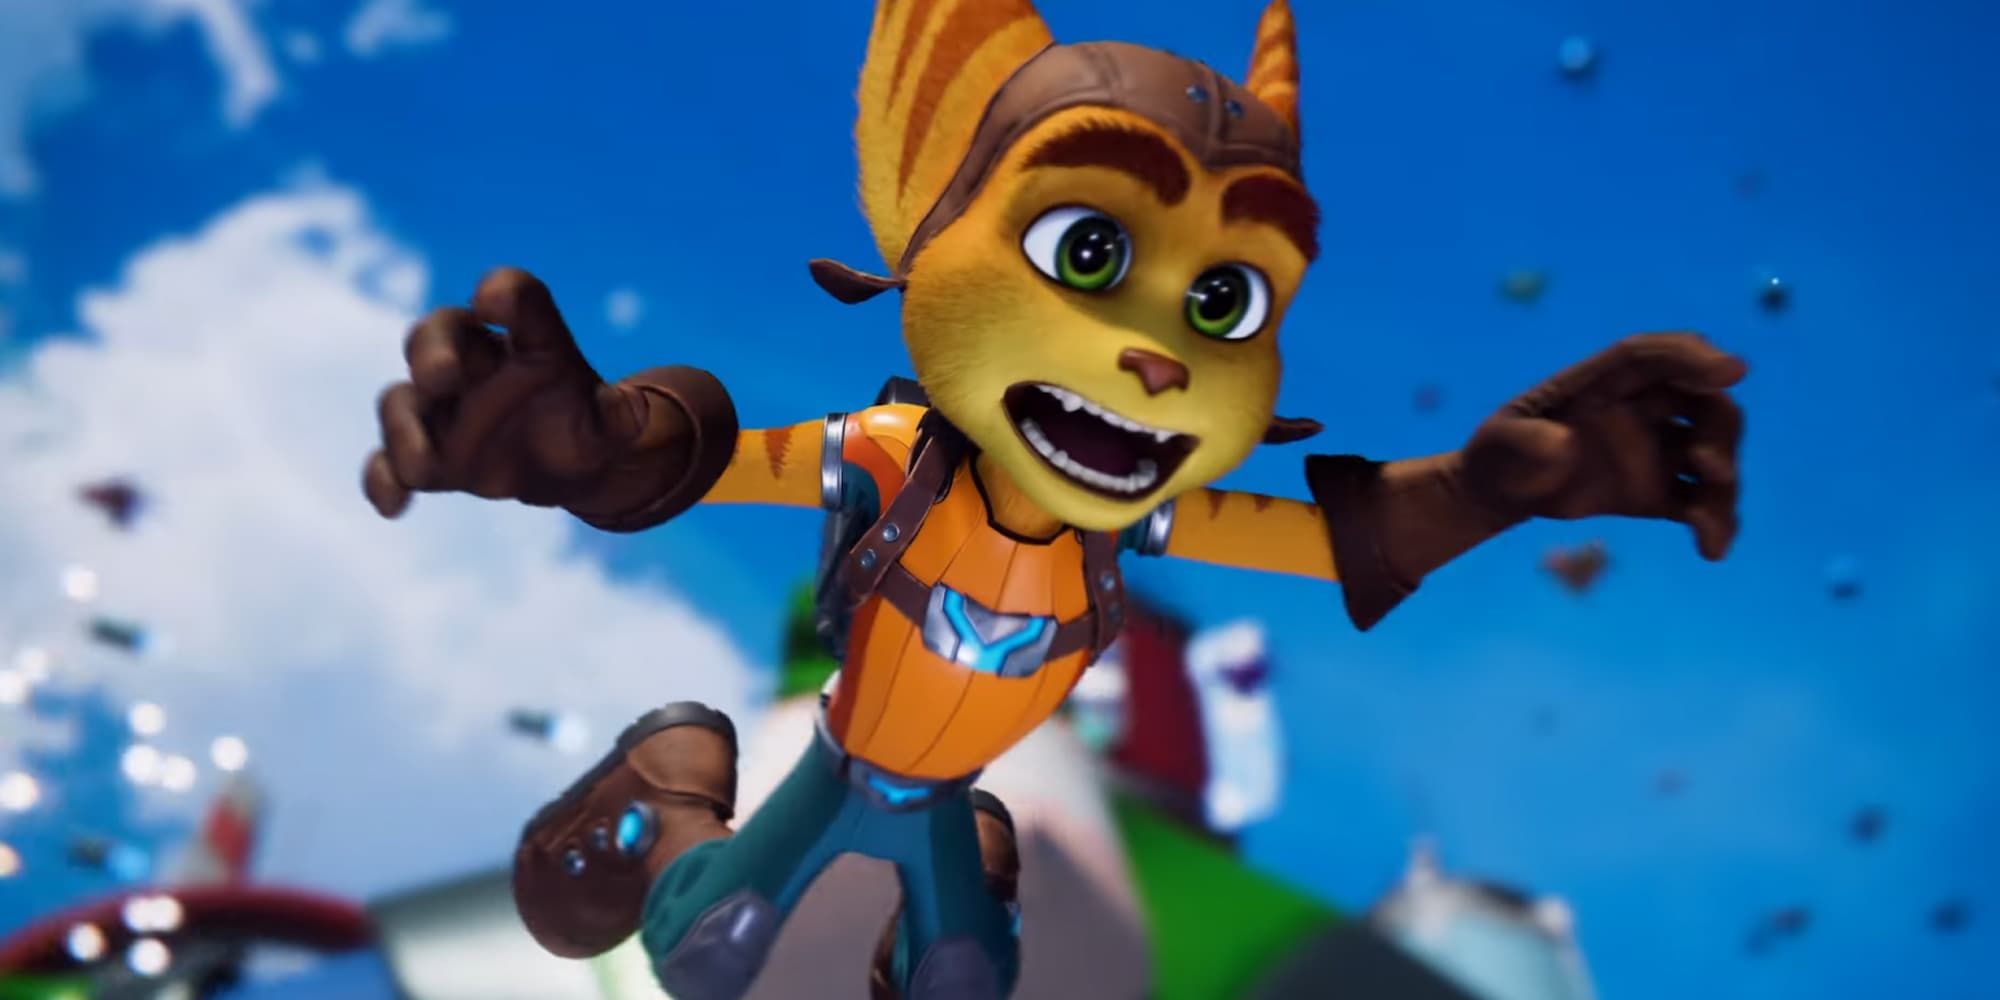 Ratchet falls from the sky in Ratchet and Clank: Rift Apart.